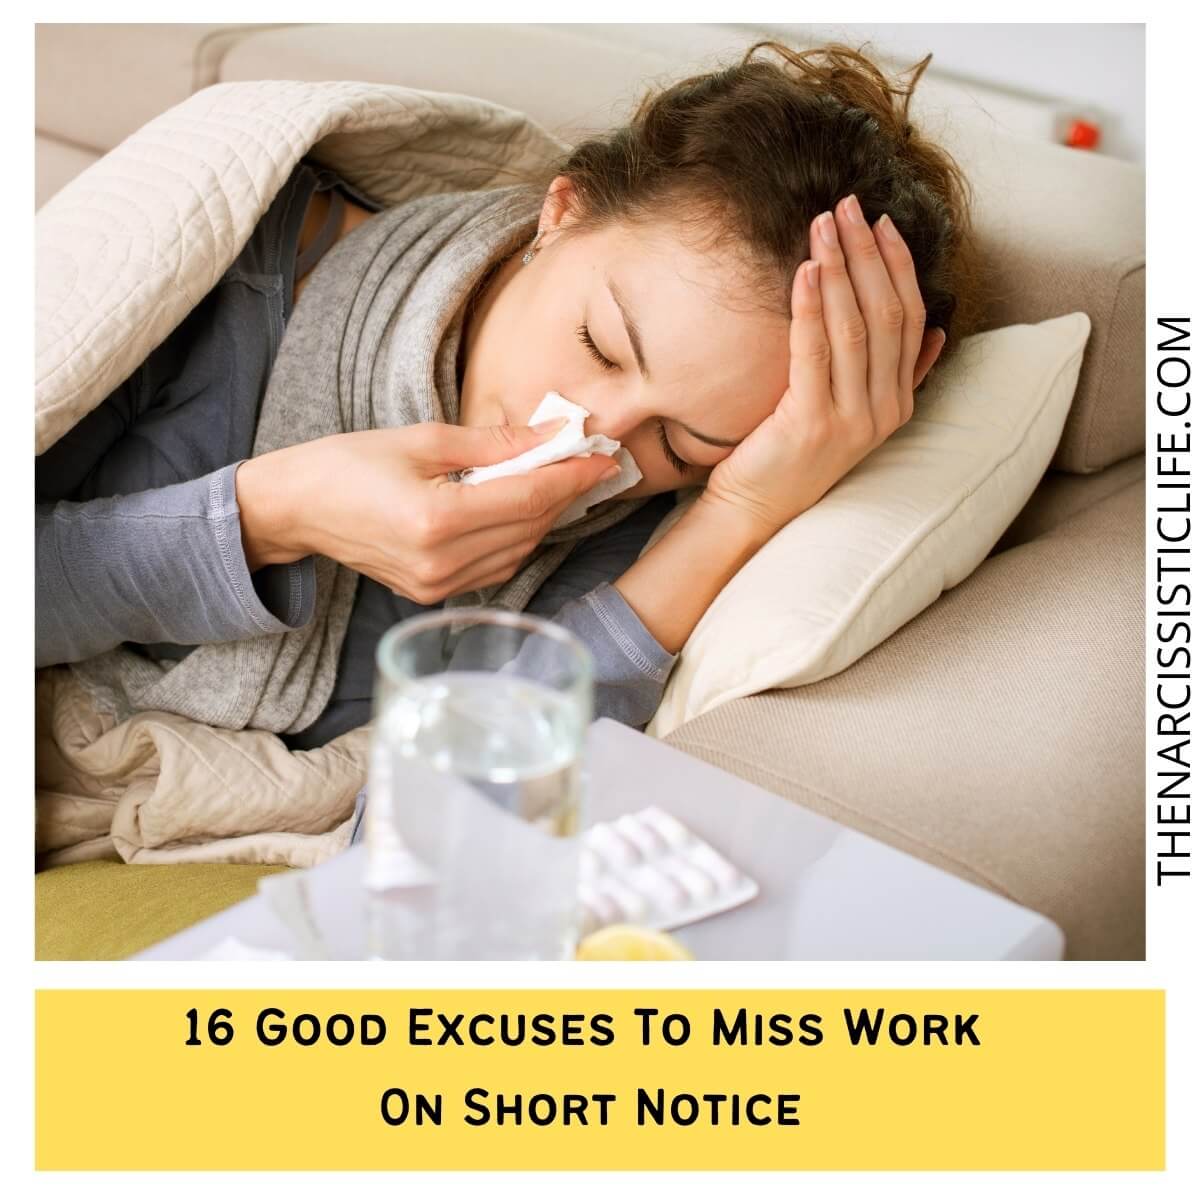 good excuses to miss work on short notice 2022